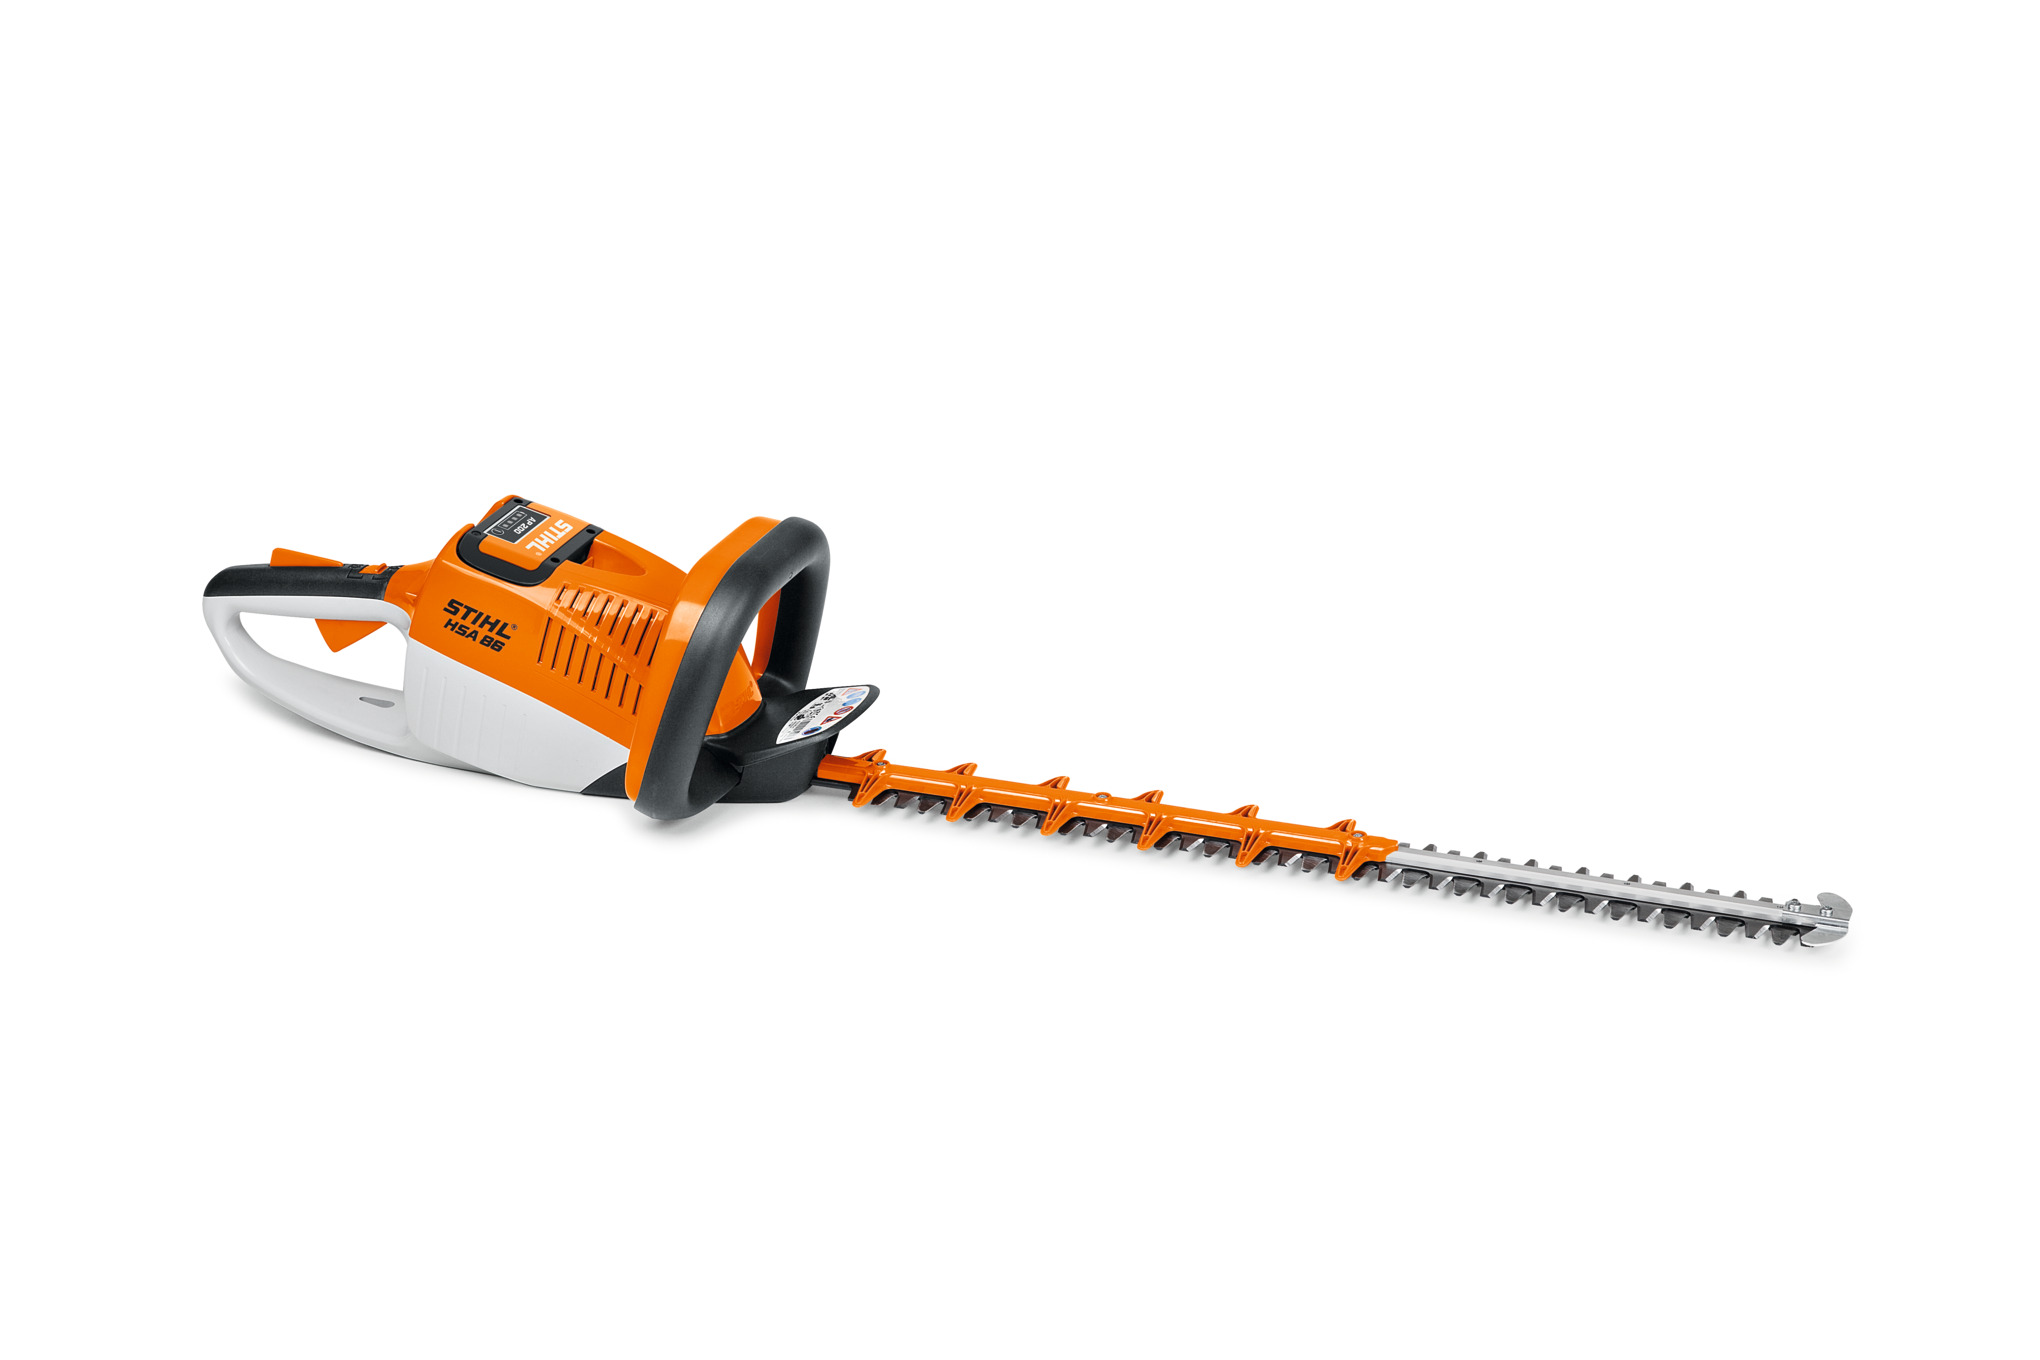 HSA 86 Hedge Trimmer